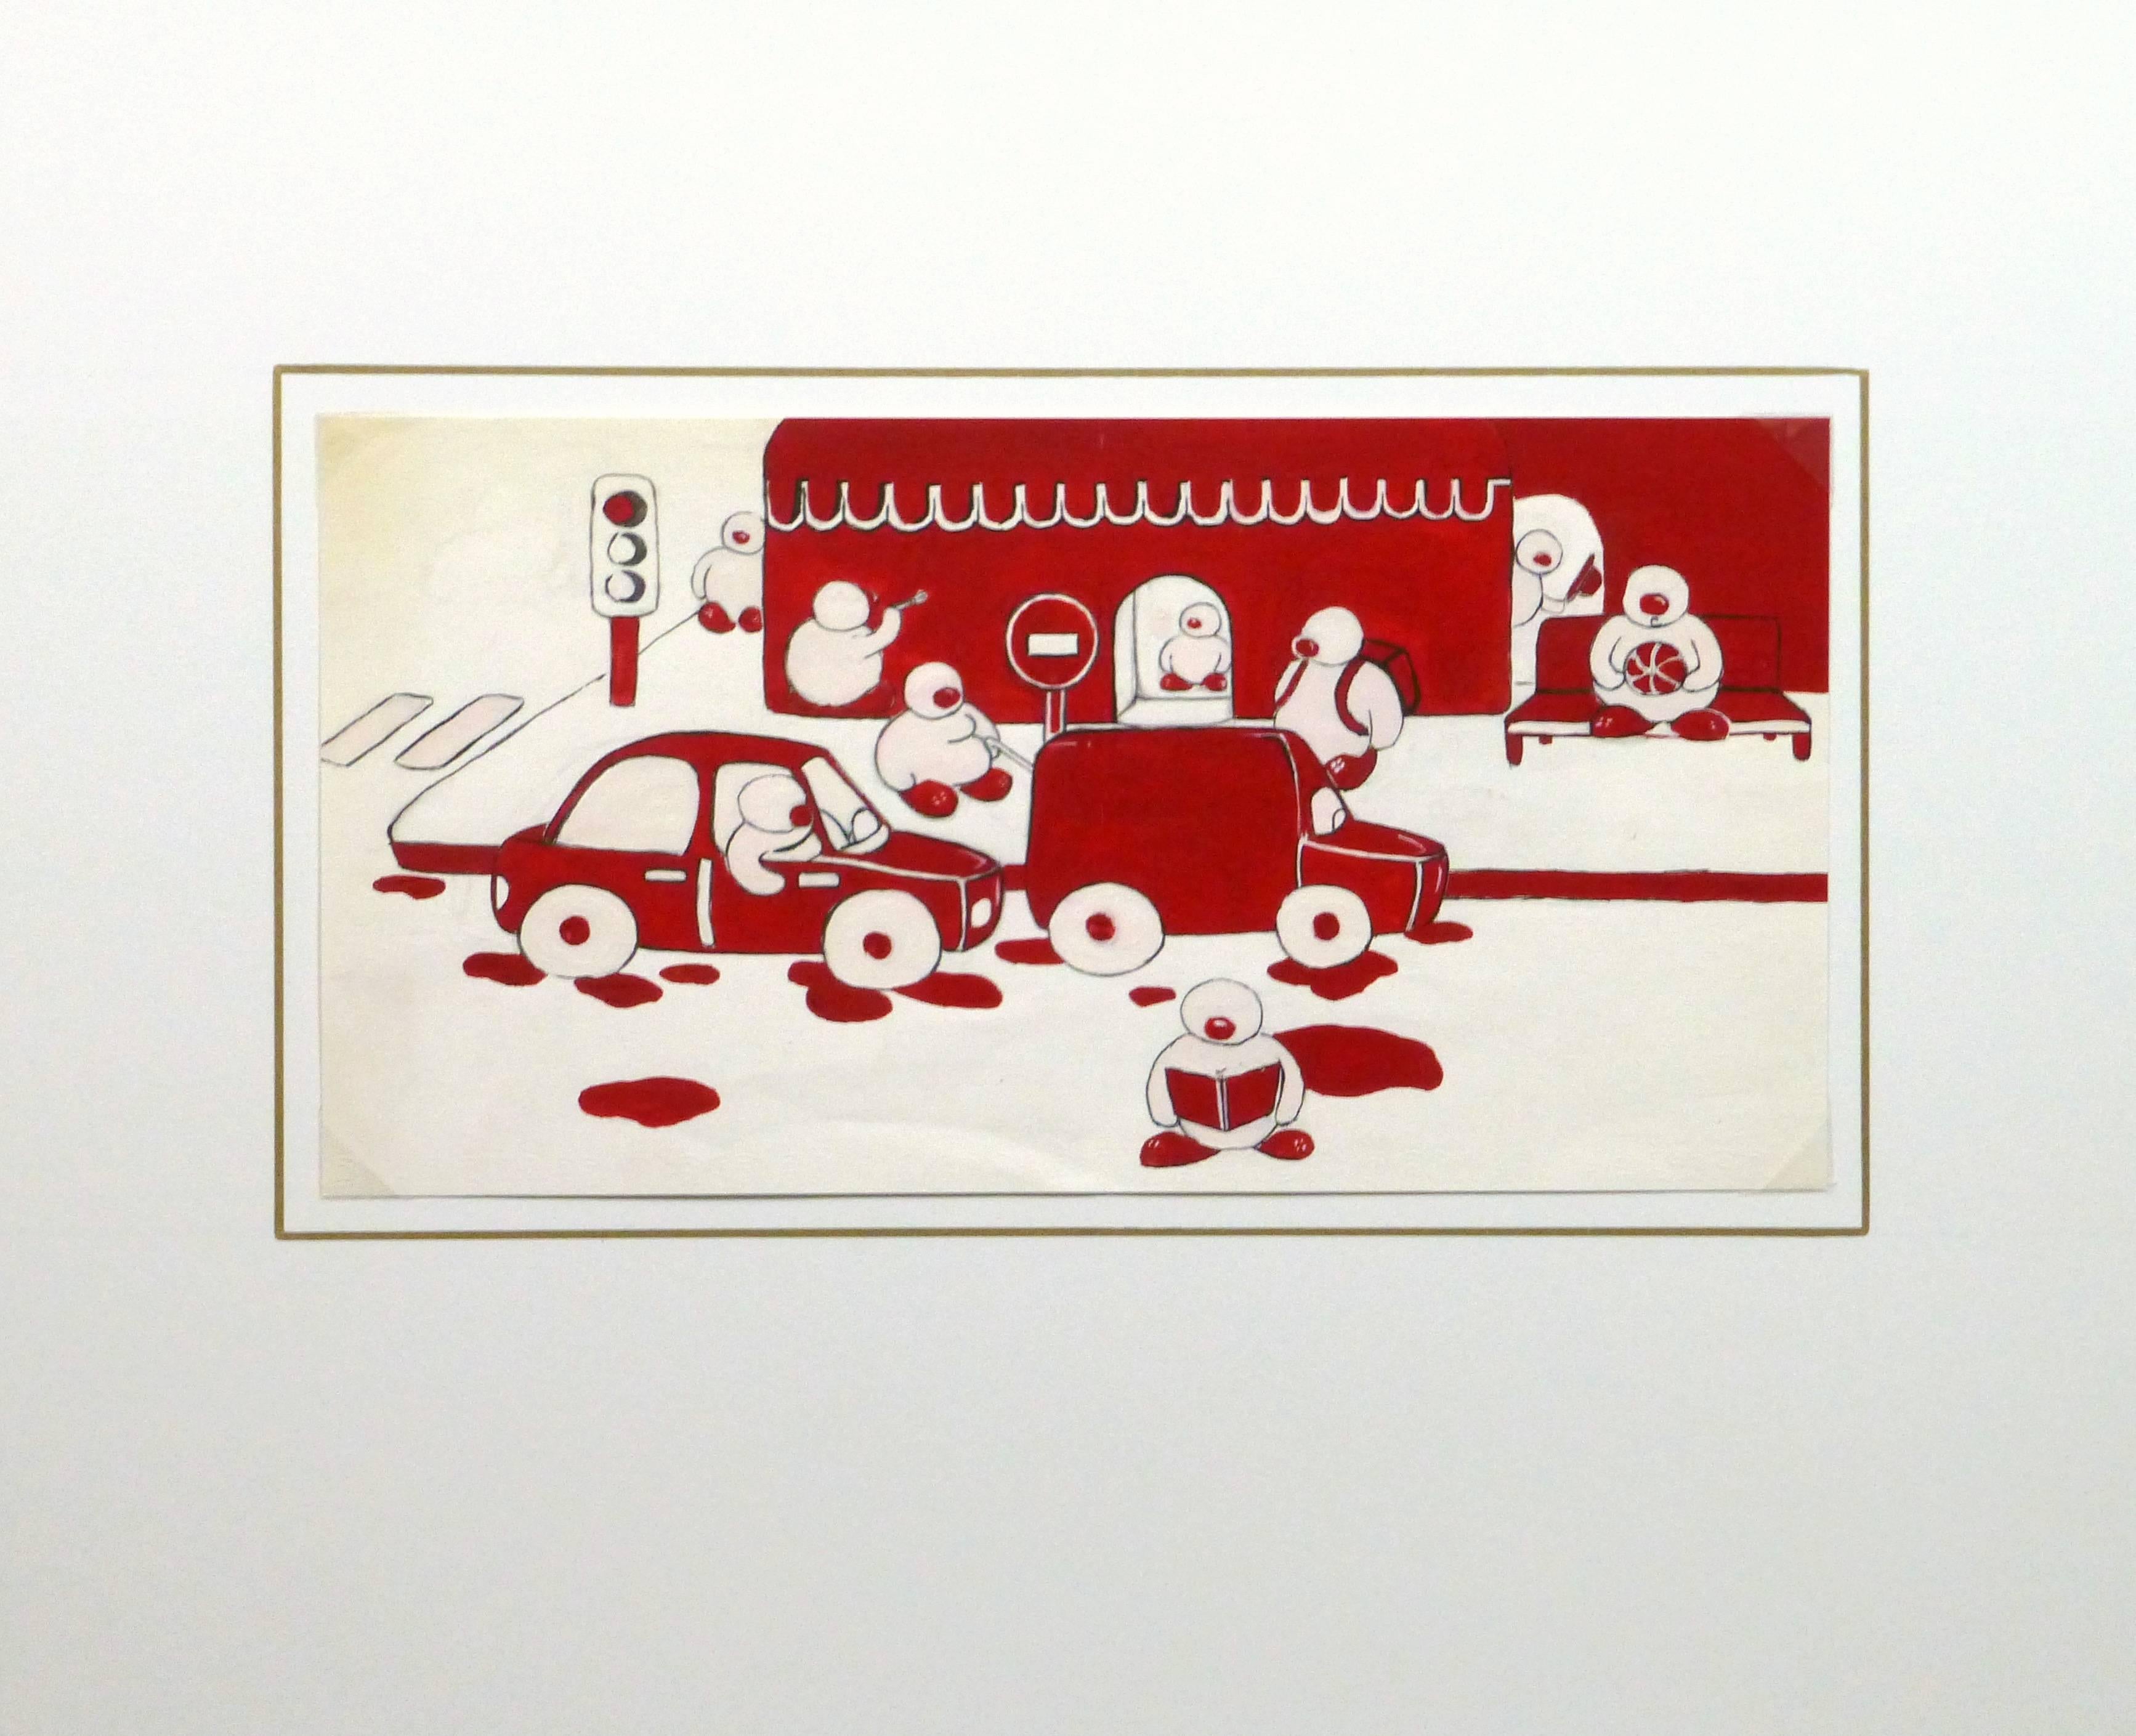 Playful abstract acrylic painting of street scene with figures in hues of red and white by artist Anne Caumont, circa 1990. 

Original artwork on paper displayed on a white mat with a gold border. Mat fits a standard-size frame. Archival plastic